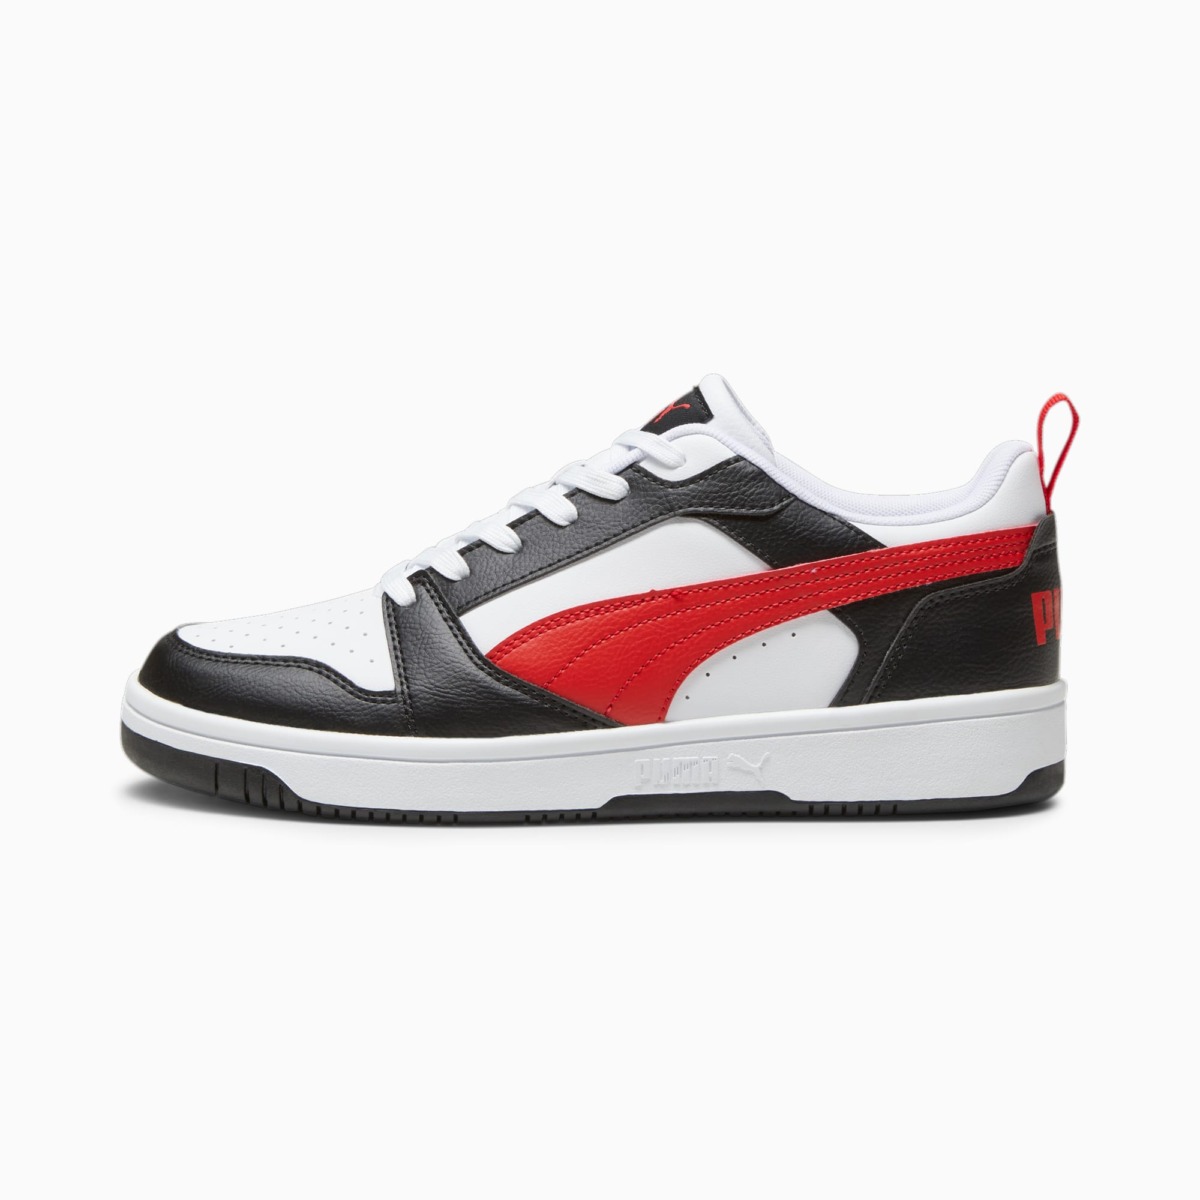 Women's Sneakers in Red by Puma GOOFASH